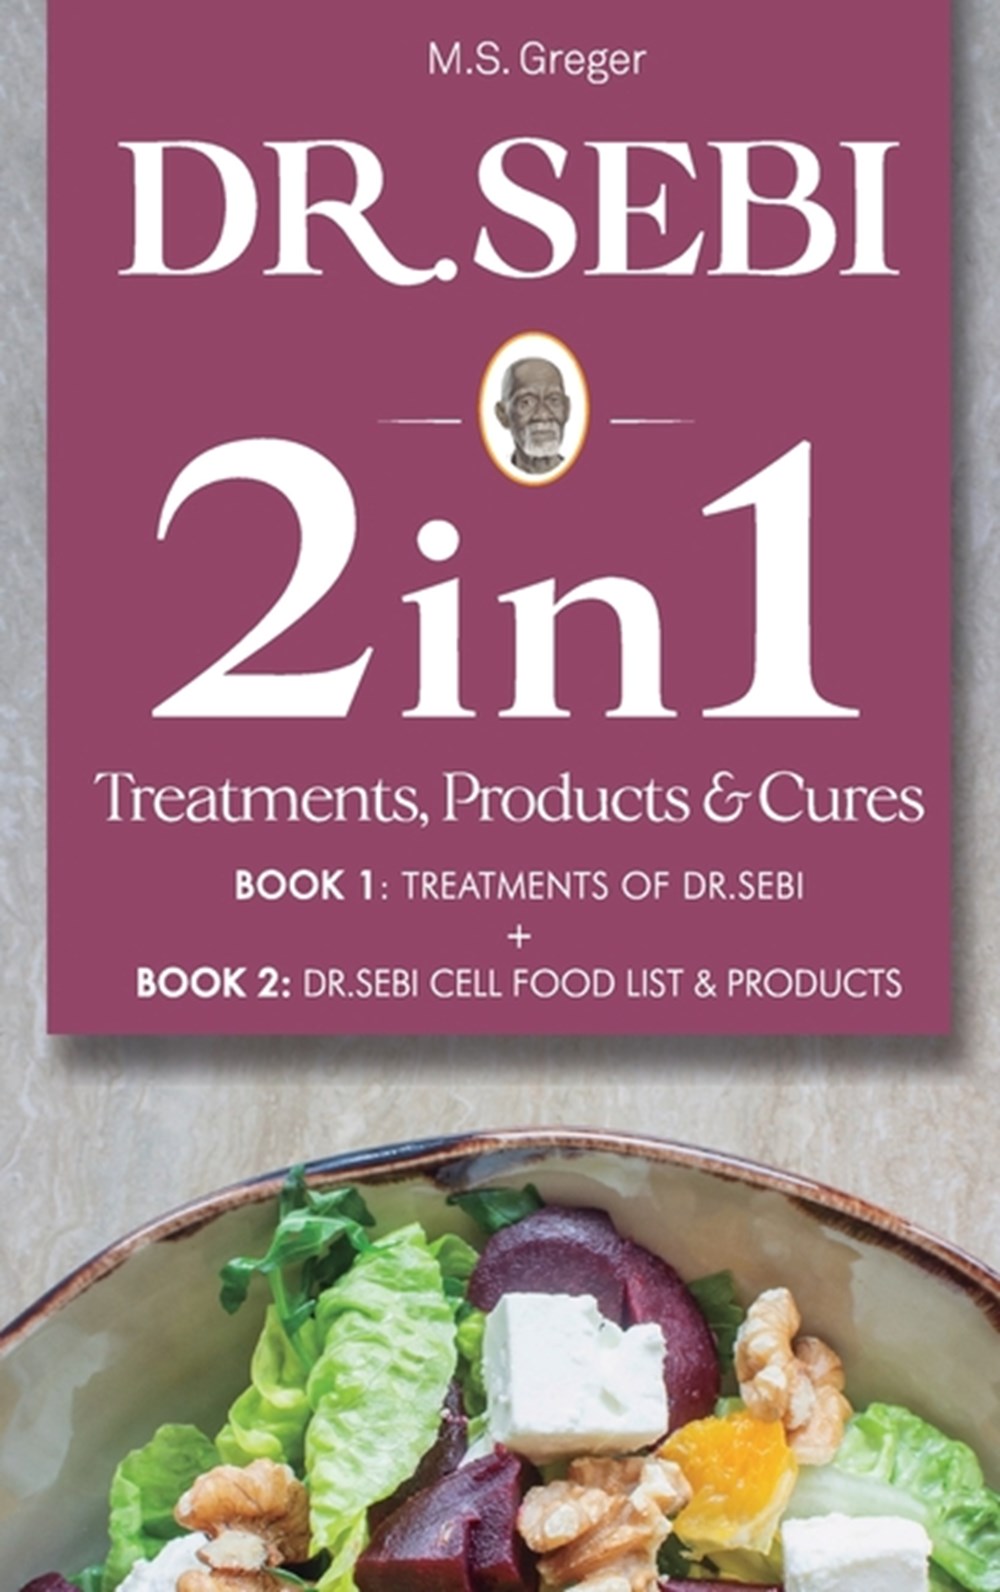 Buy Dr Sebi 2 In 1 Treatments Cures Products Book Treatments Of Dr Sebi Cell Food List And Products By M S Greger From Porchlight Book Company